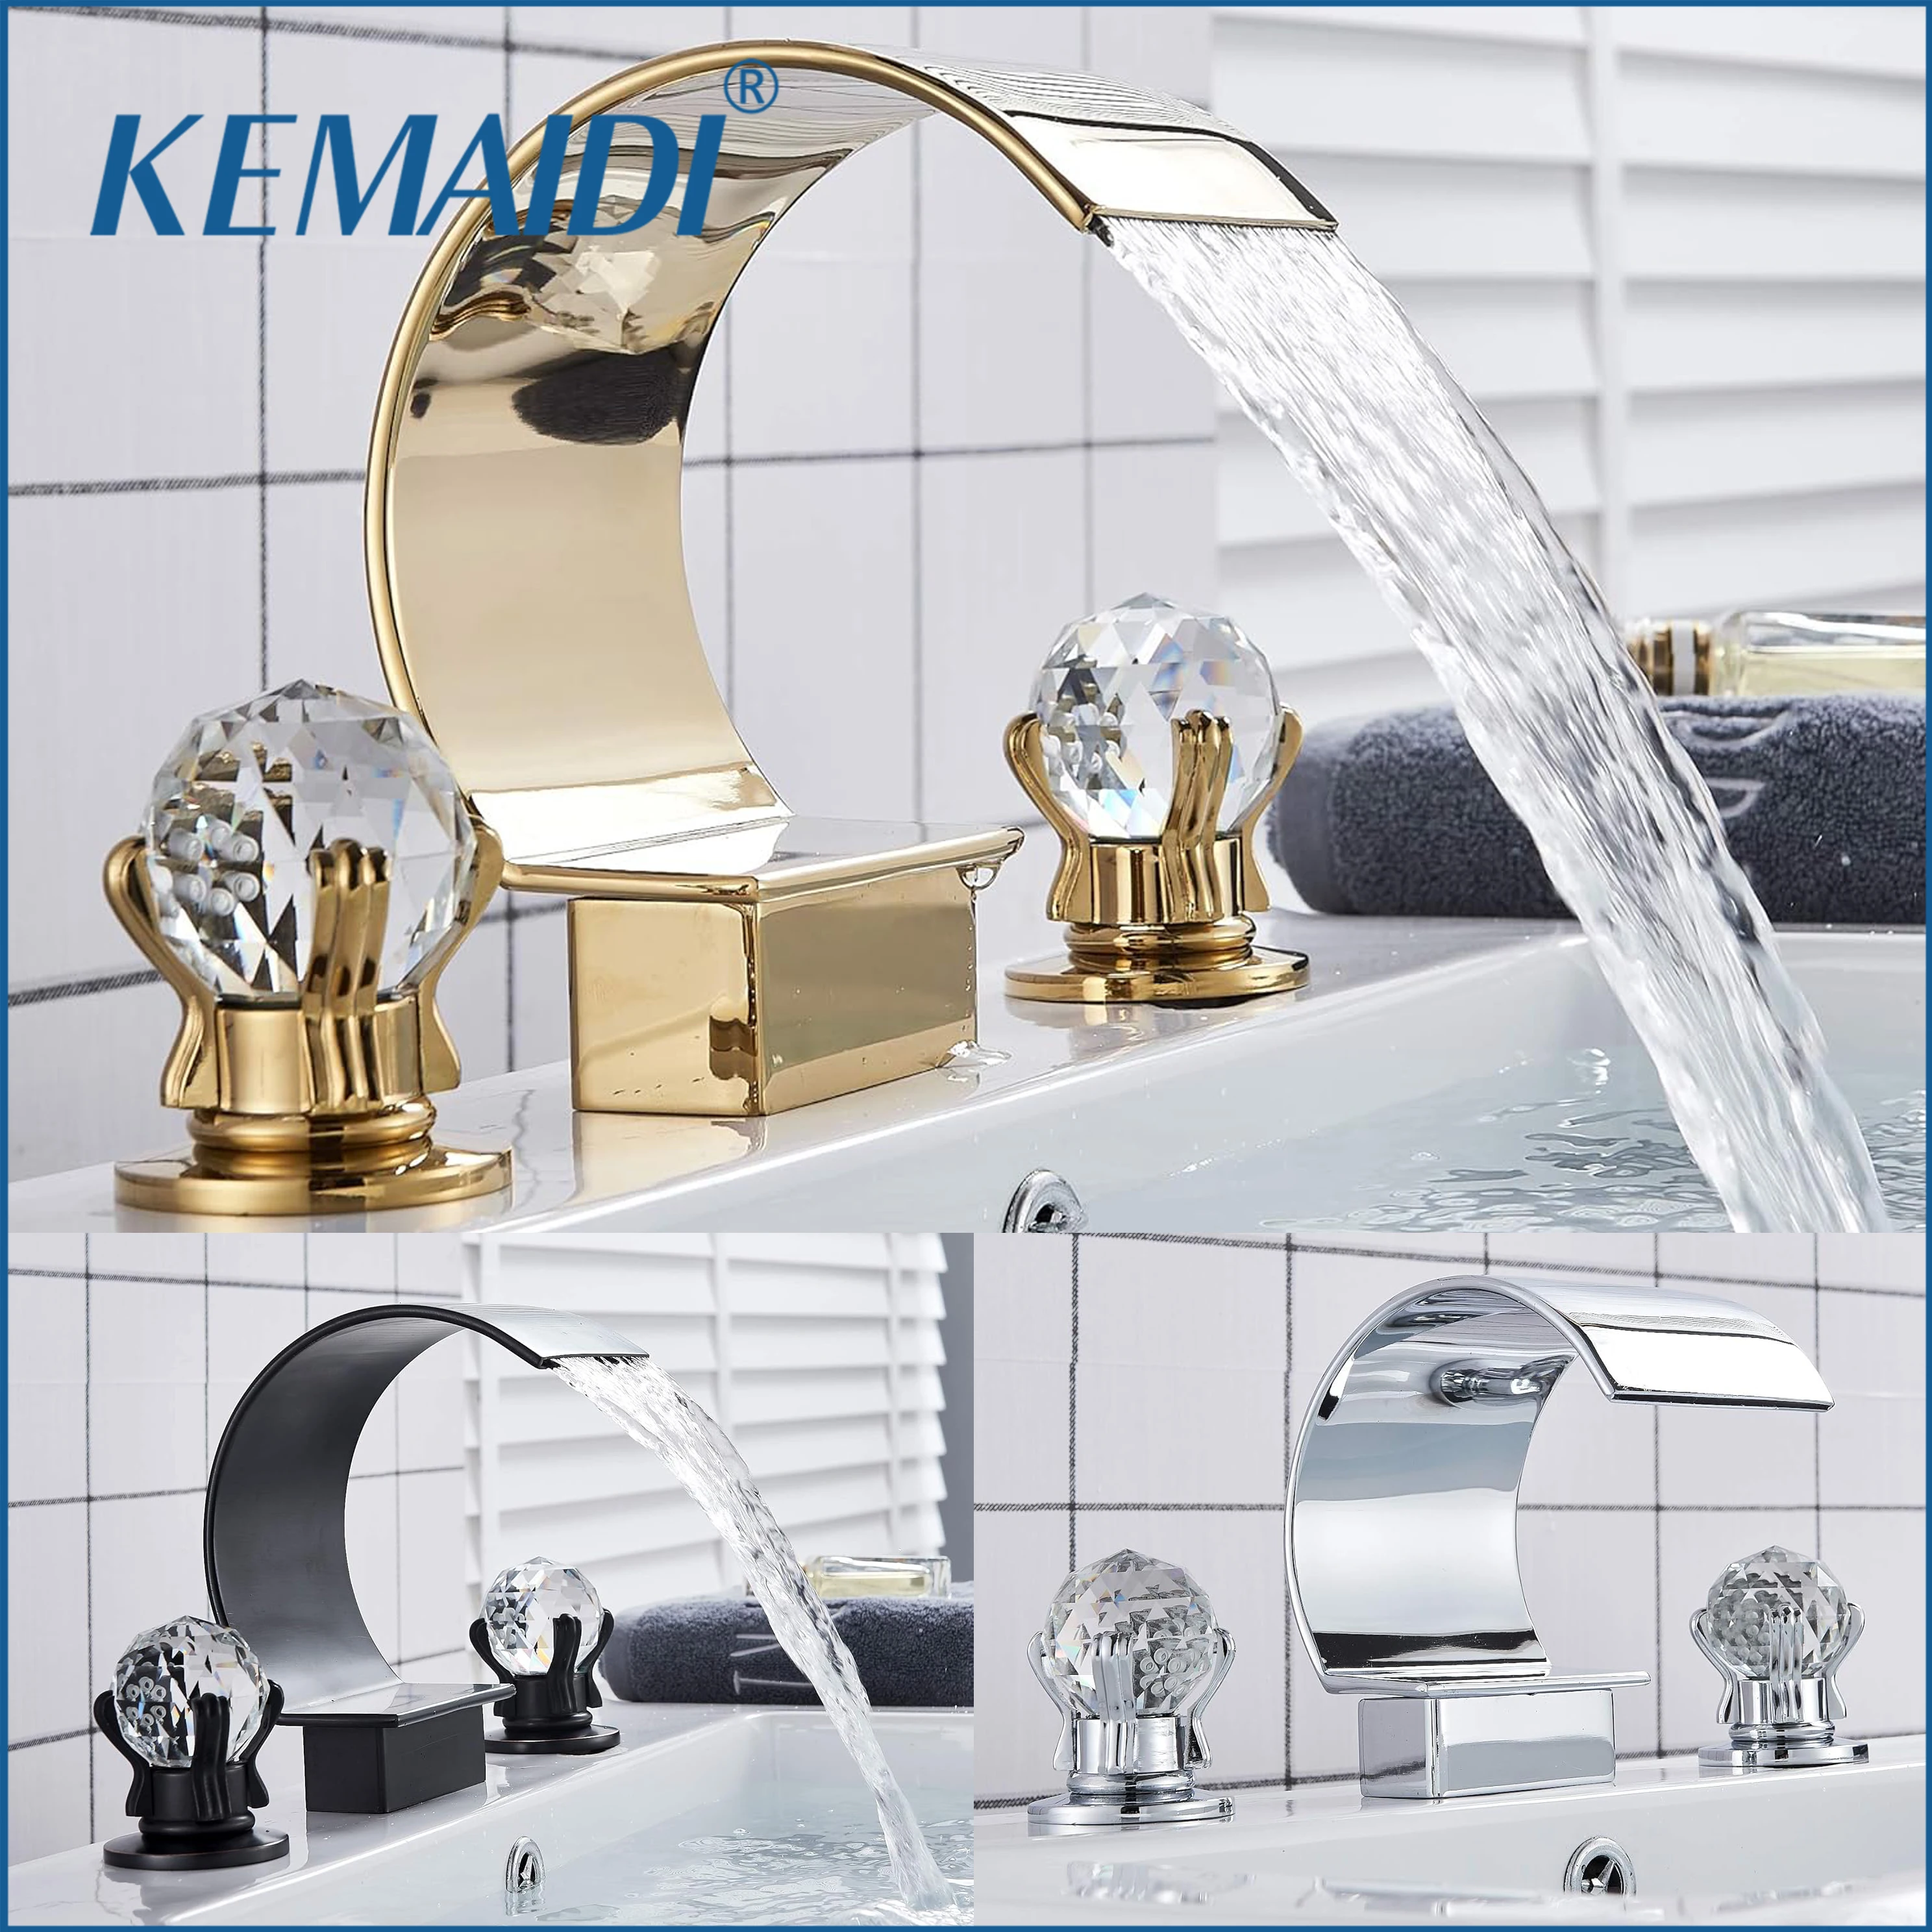 

KEMAIDI Polished Gold Bathroom Faucet Dual Crystal Knobs Widespread Vanity Basin Mixer Tap Bathtub Filler Faucets for Bath Sink